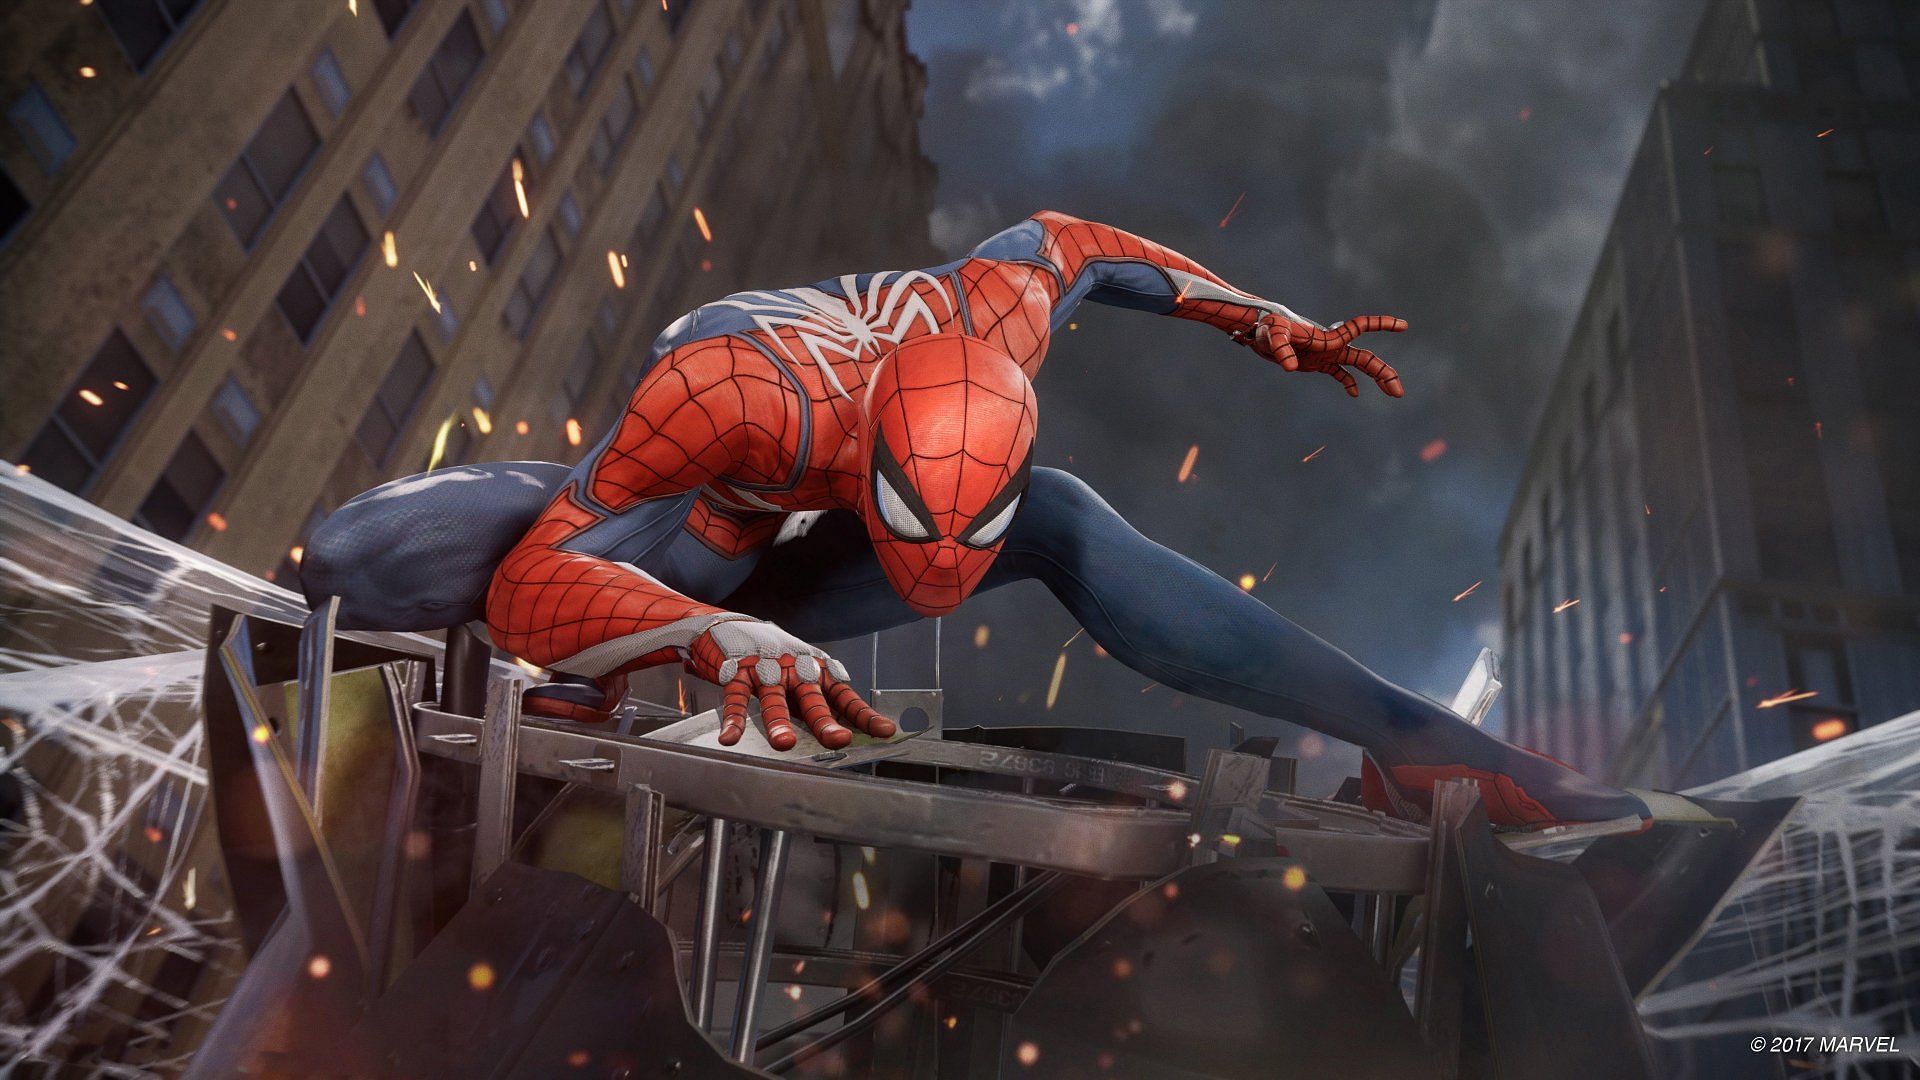 Swing, jump, web up enemies, and take down bad guys of New York before it is too late (image via Insomniac Games)